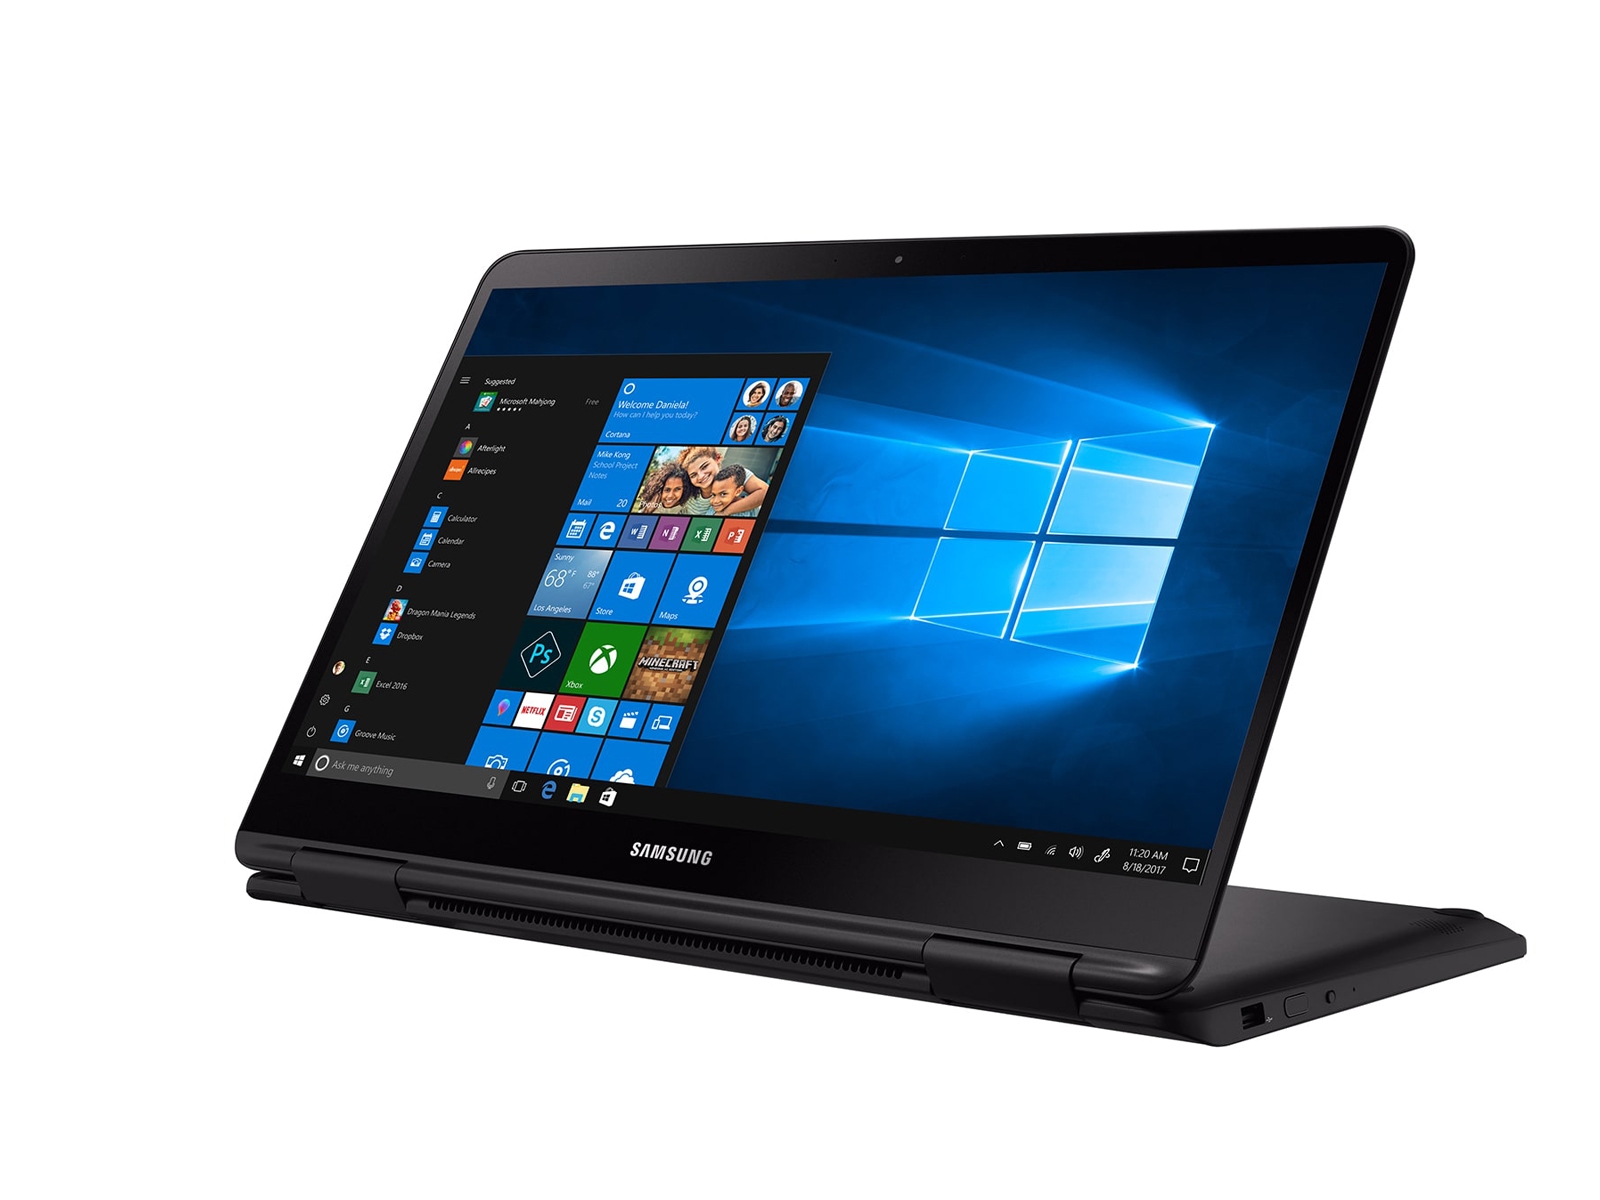 Series 7, Windows Laptops Support | Samsung Care US